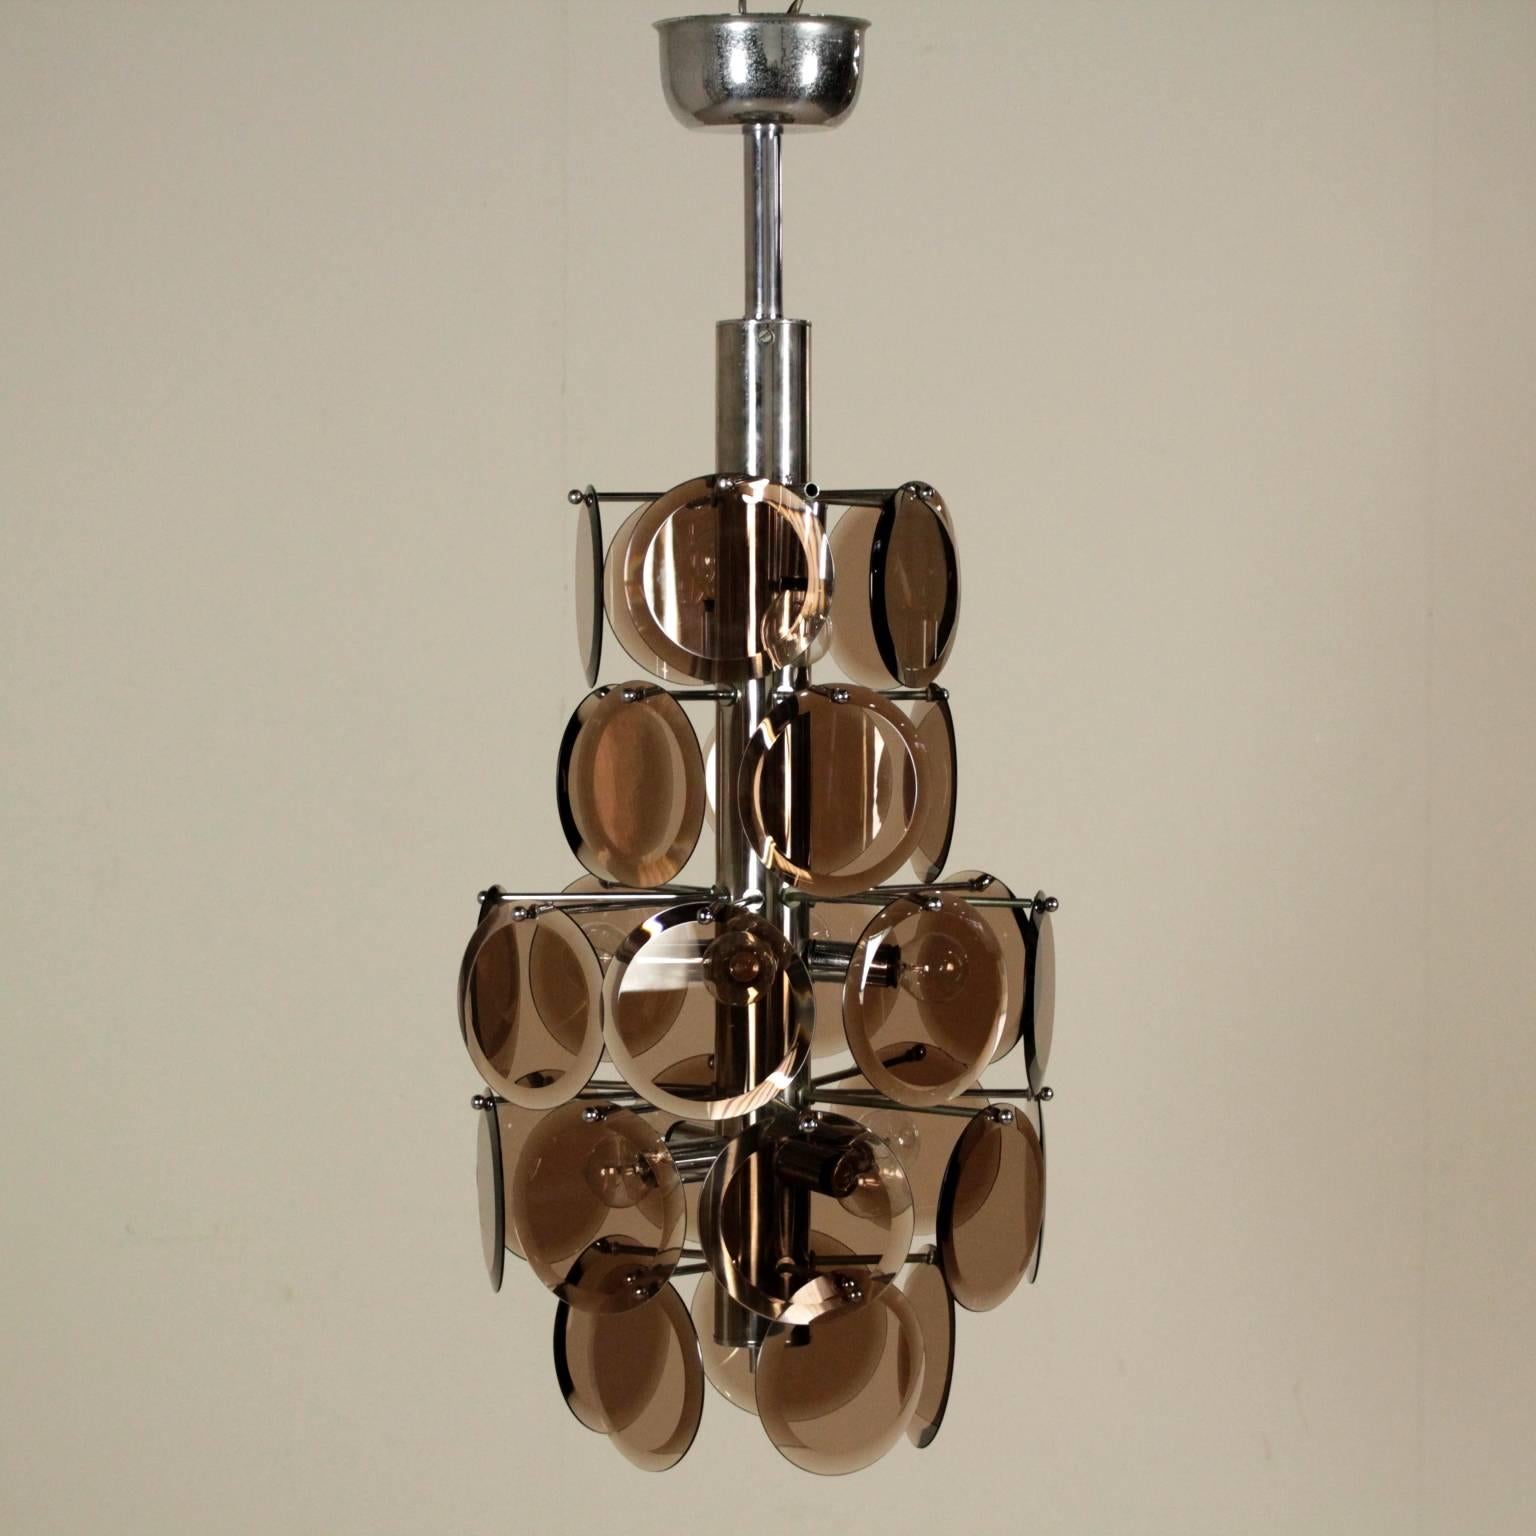 A hanging lamp, metal structure, glass discs. Manufactured in Italy, 1960s-1970s.